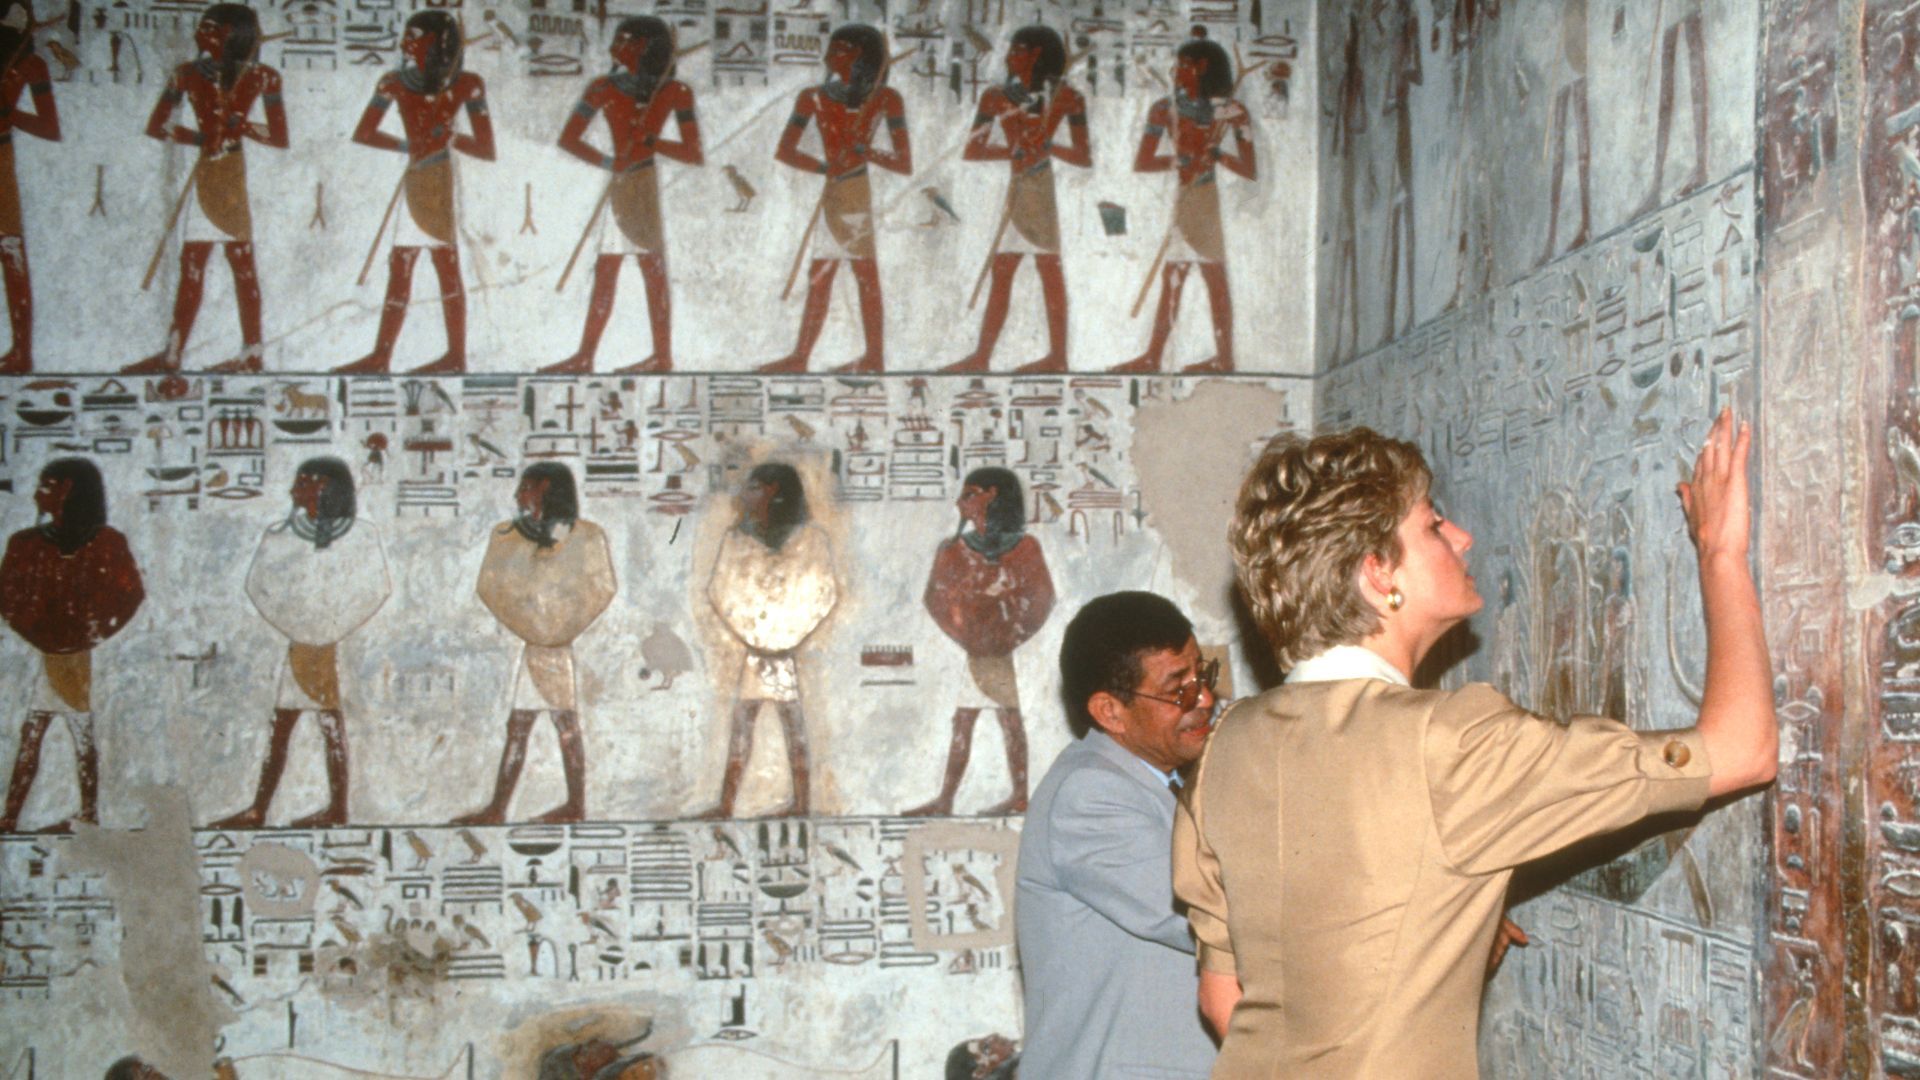 <p>                     Diana visited the pyramids on the Giza Plateau in Egypt in 1992 as part of a solo trip a few months after her separation from the then Prince Charles was confirmed. She declared the pyramids "breathtaking" and looked relaxed at the ancient site, despite claims by photographer Kent Gavin that she had initially been reluctant to pose in front of the pyramids. The Egyptian jaunt also saw the princess visiting the Cairo Institute for Polio Rehabilitation before her trip to the Pyramids and Sphinx on the Giza plateau.                   </p>